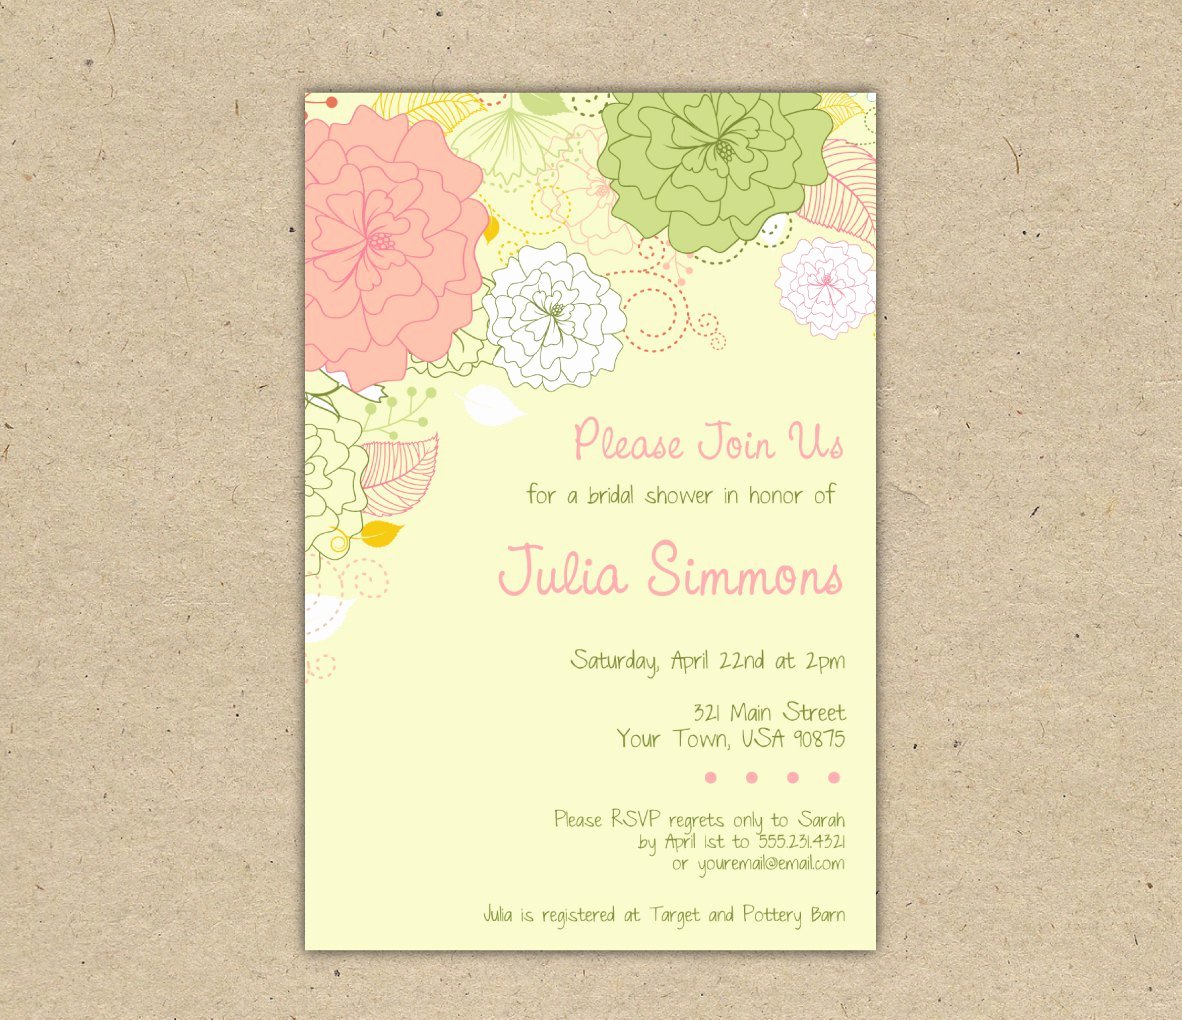 Bridal Shower Invite Template Luxury Bridal Shower Template Example Mughals